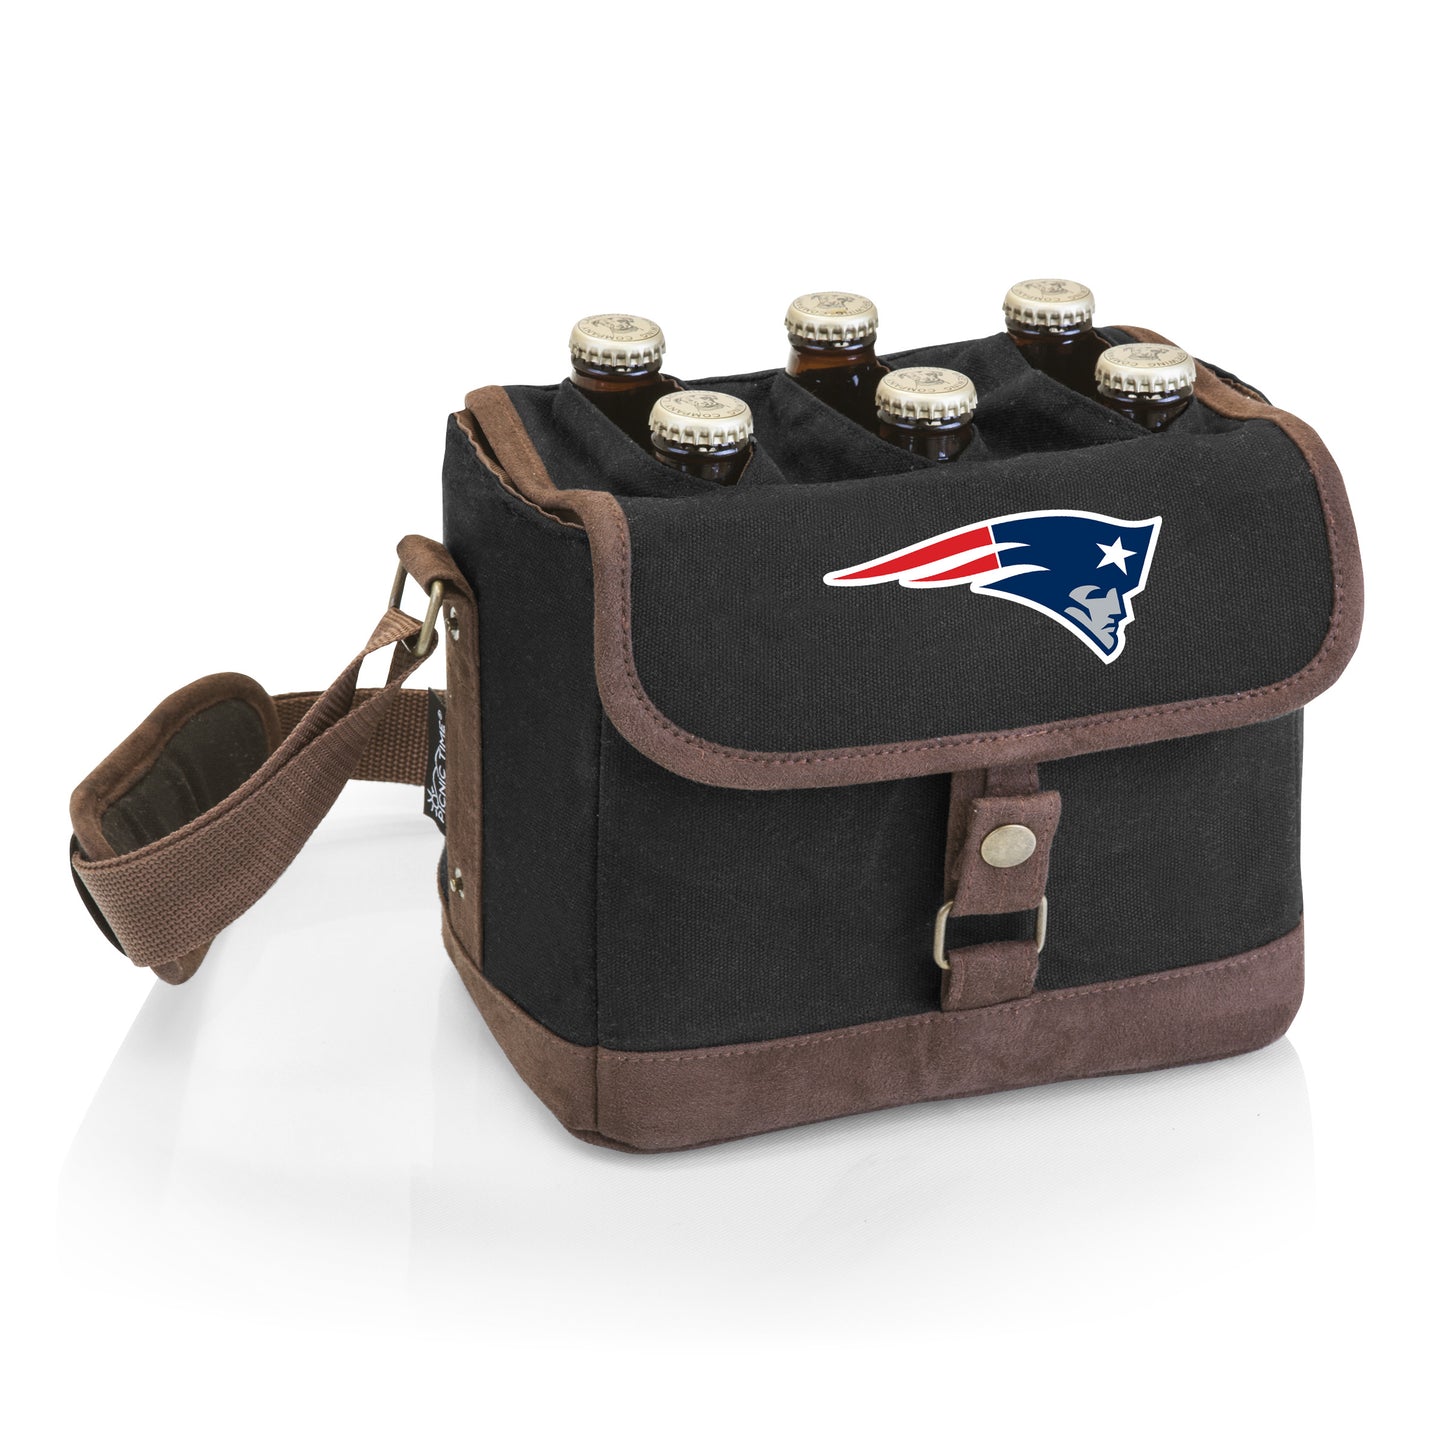 New England Patriots - Beer Caddy Cooler Tote with Opener